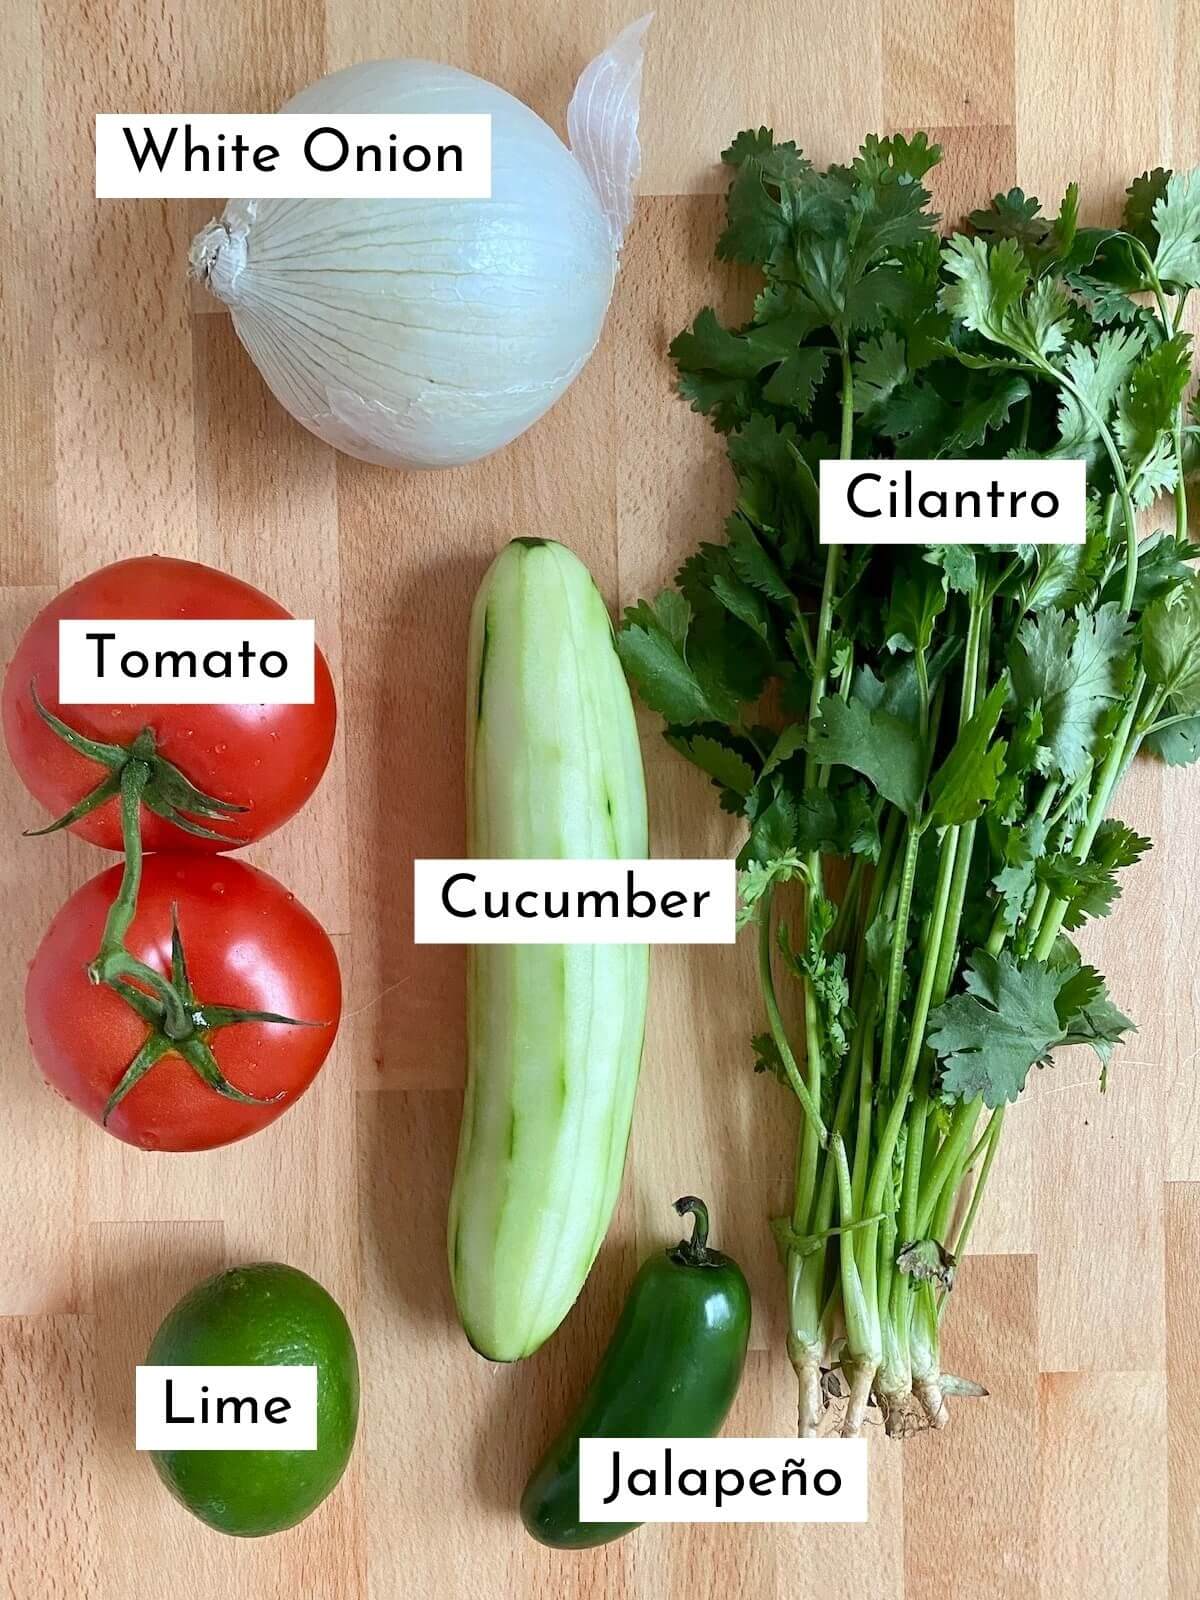 The ingredients to make cucumber pico de gallo. Each ingredient is labeled with text and includes white onion, tomato, cucumber, cilantro, lime, and jalapeño.